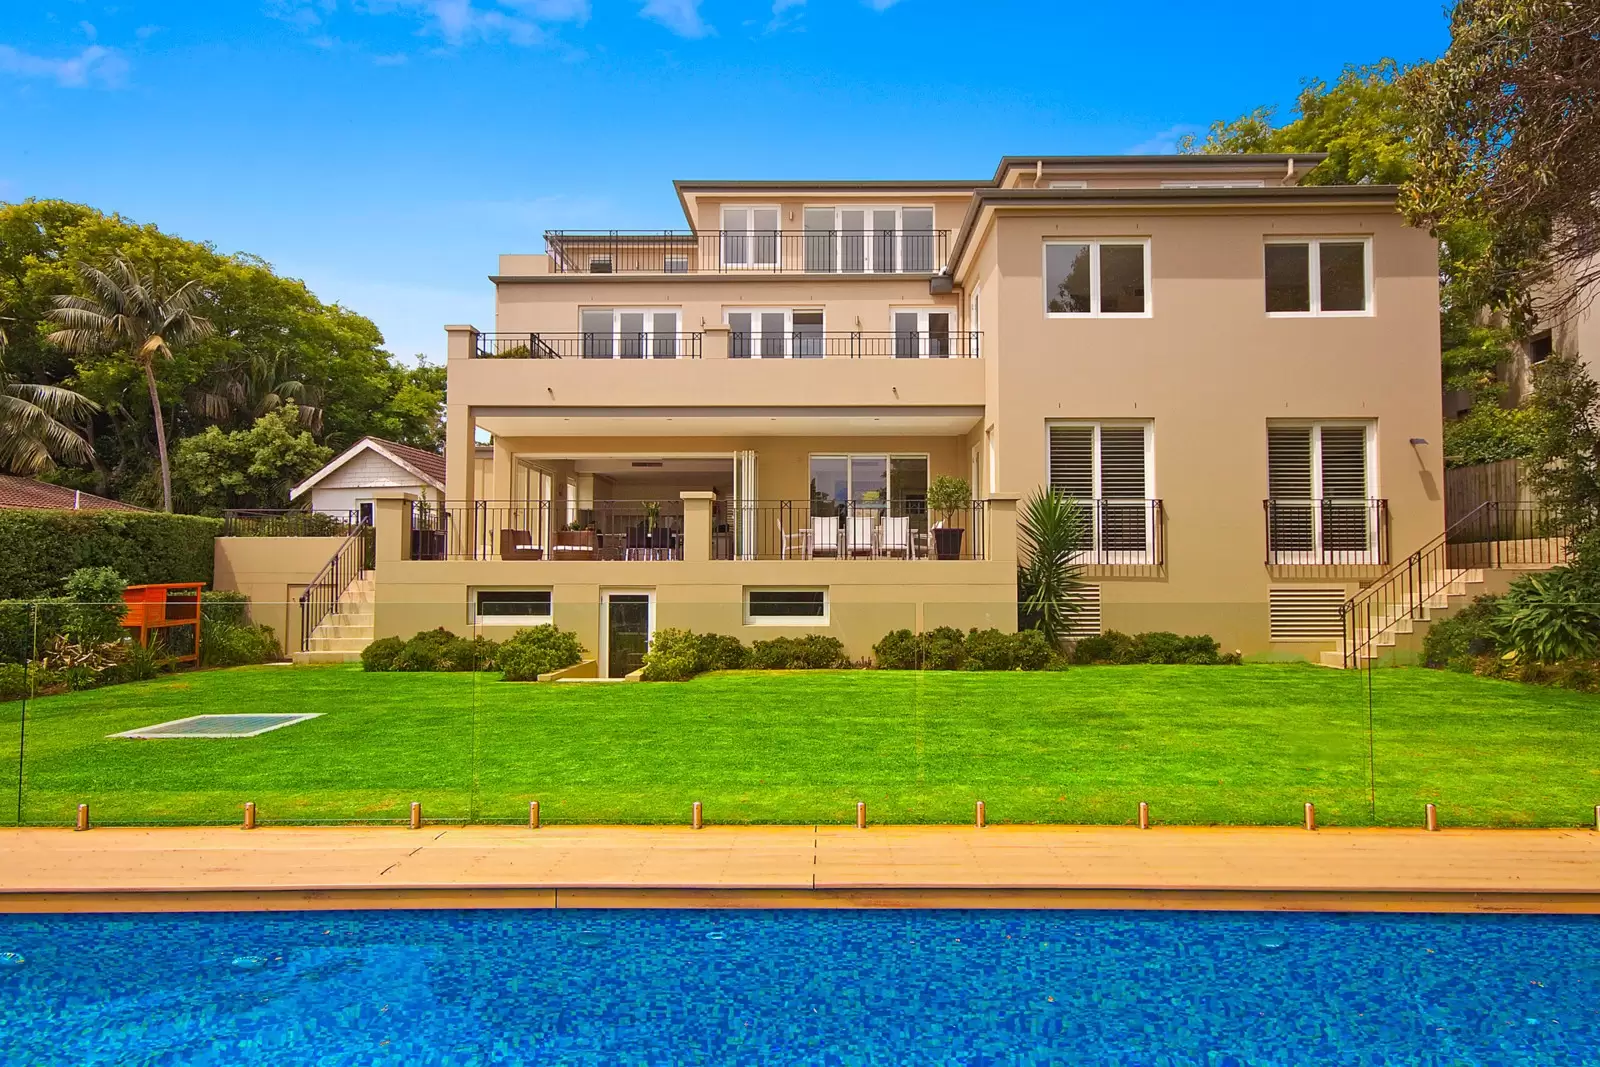 Photo #10: 22 March Street, Bellevue Hill - Sold by Sydney Sotheby's International Realty